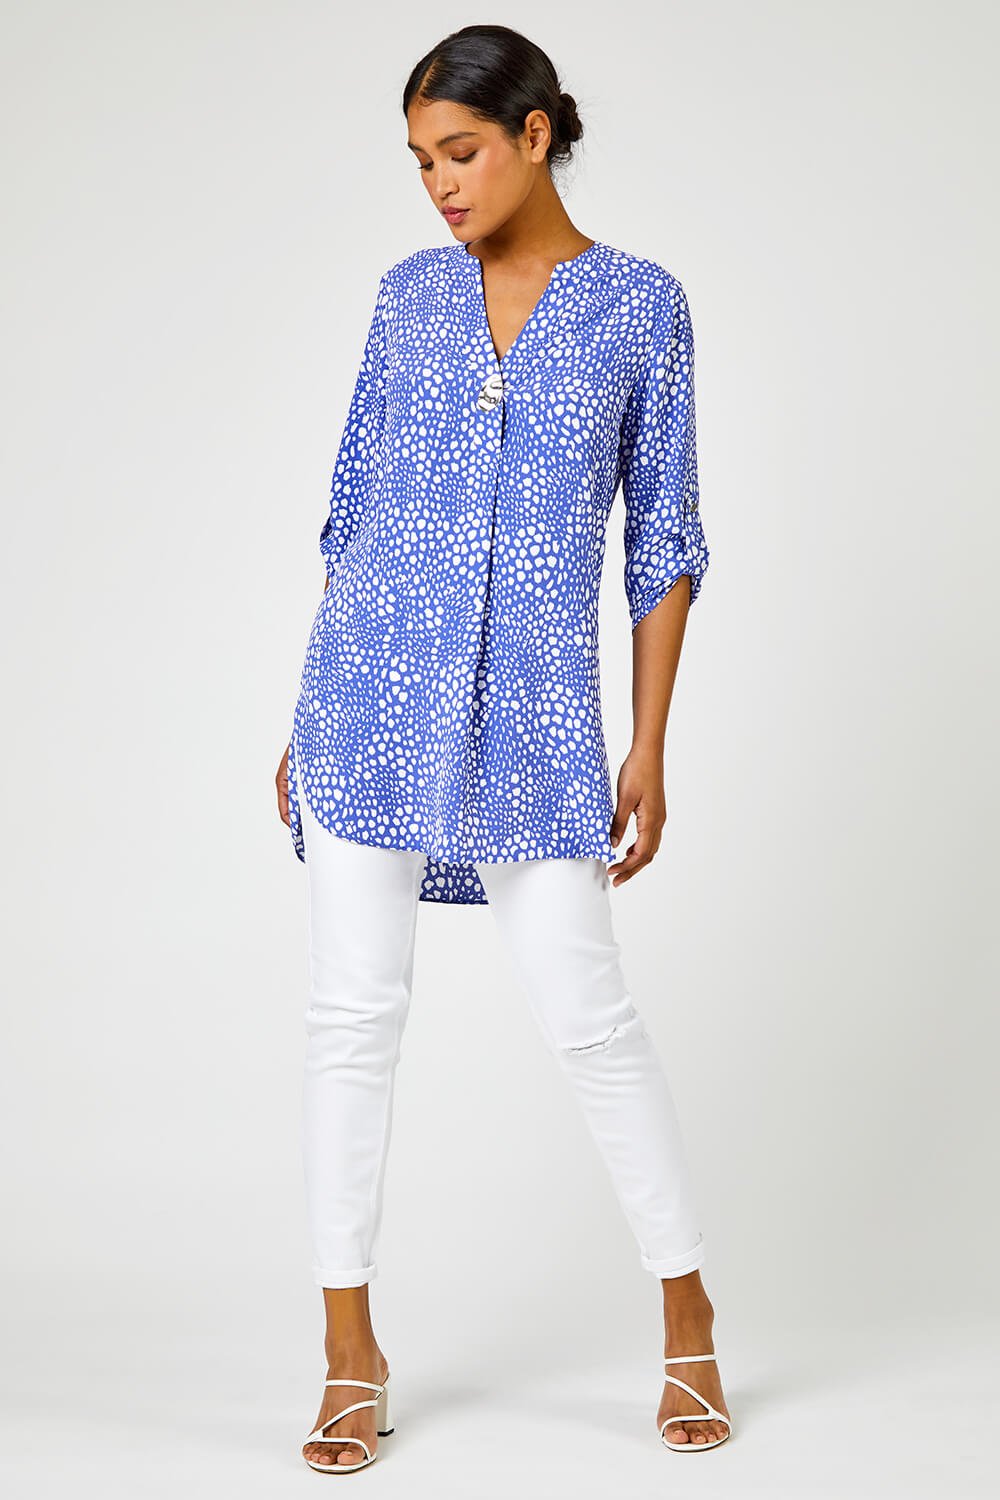 Blue Longline Button Detail Abstract Spot Print Top, Image 3 of 5